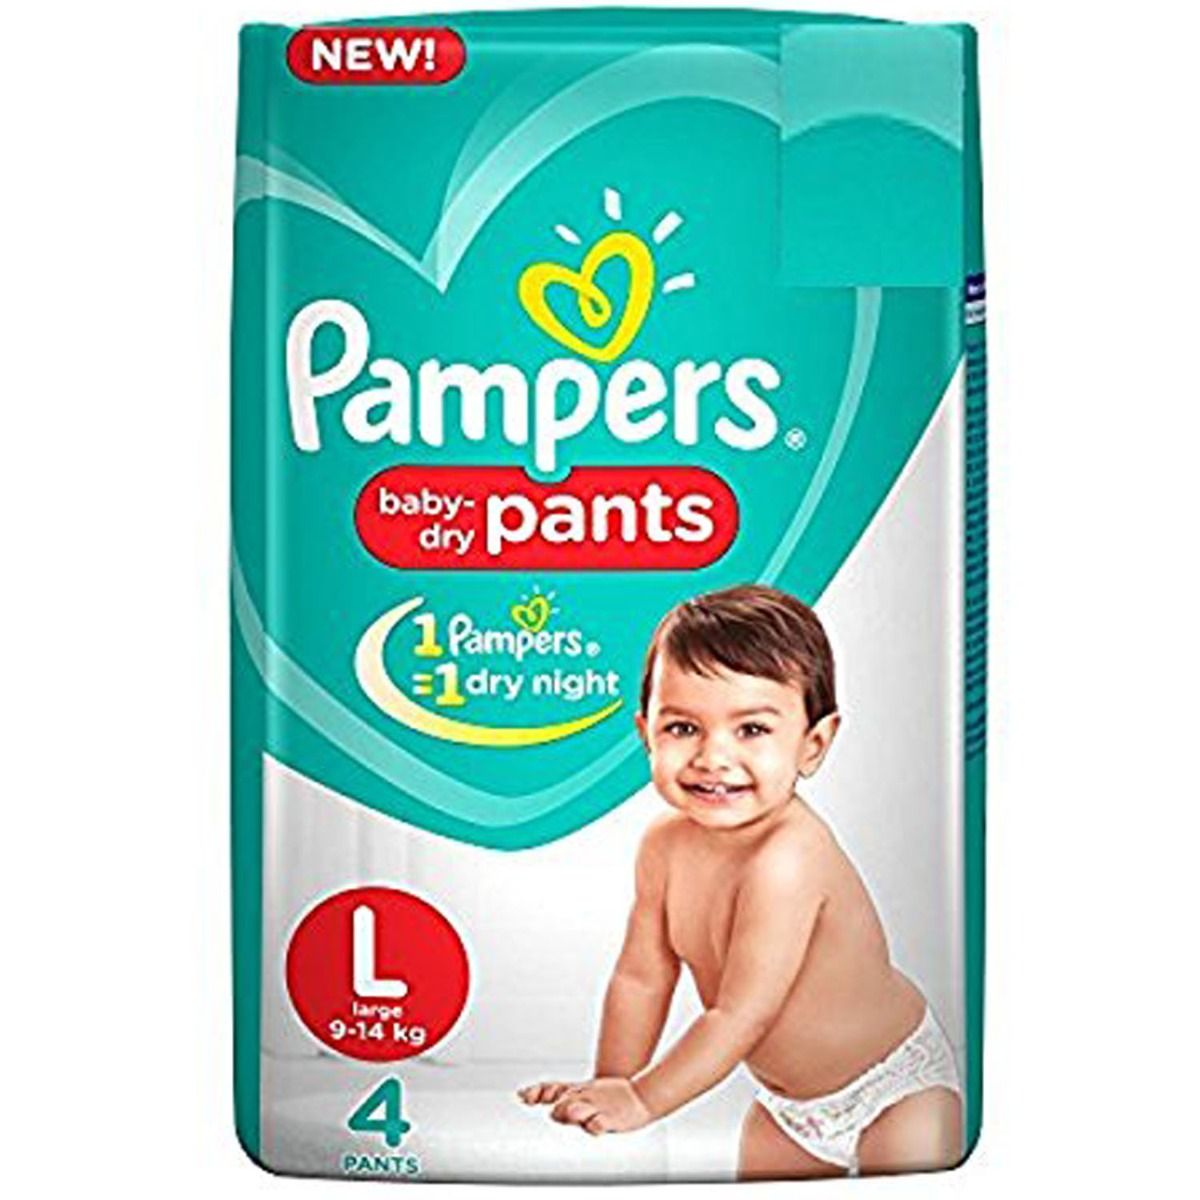 Buy Pampers Baby-Dry Diaper Pants Large, 4 Count Online